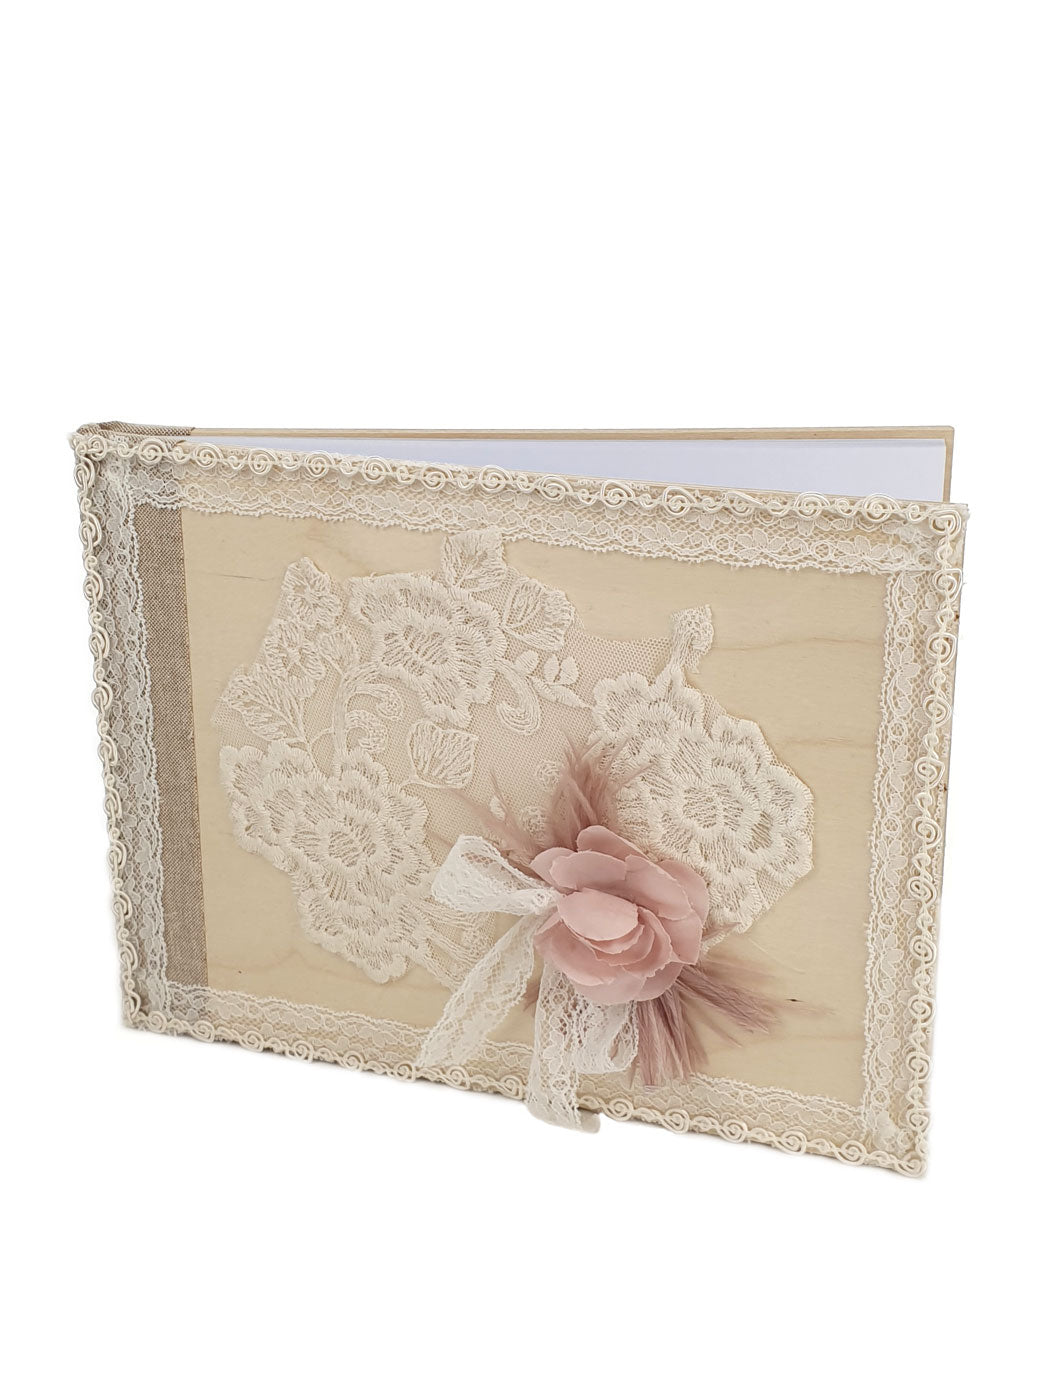 Christening wish Book with Lace